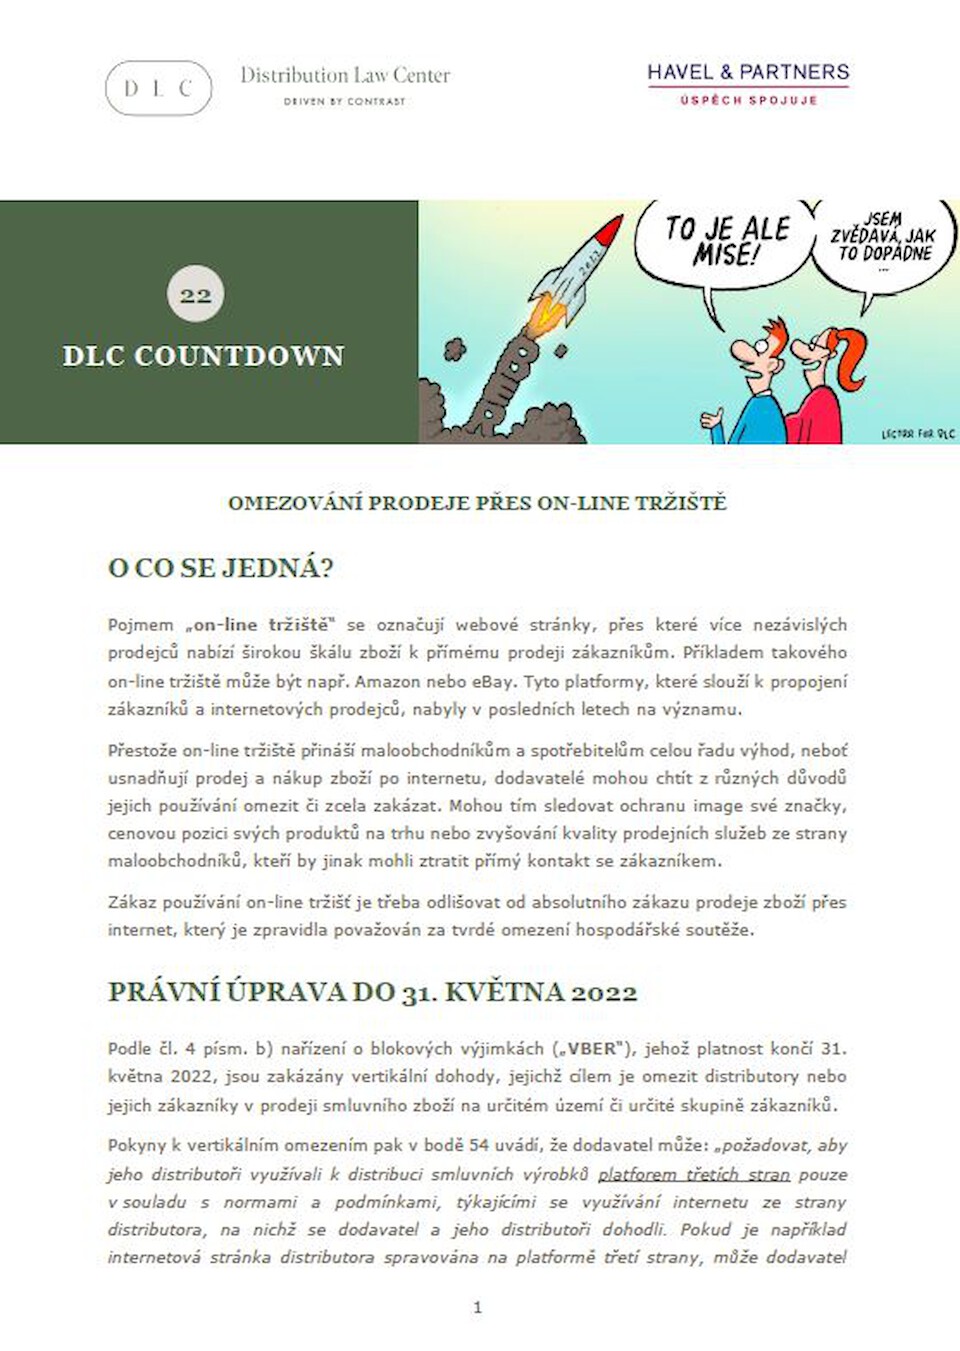 Distribution Law Center Countdown XXII - E-commerce (Restricting the use of online marketplaces / Online marketplace bans)